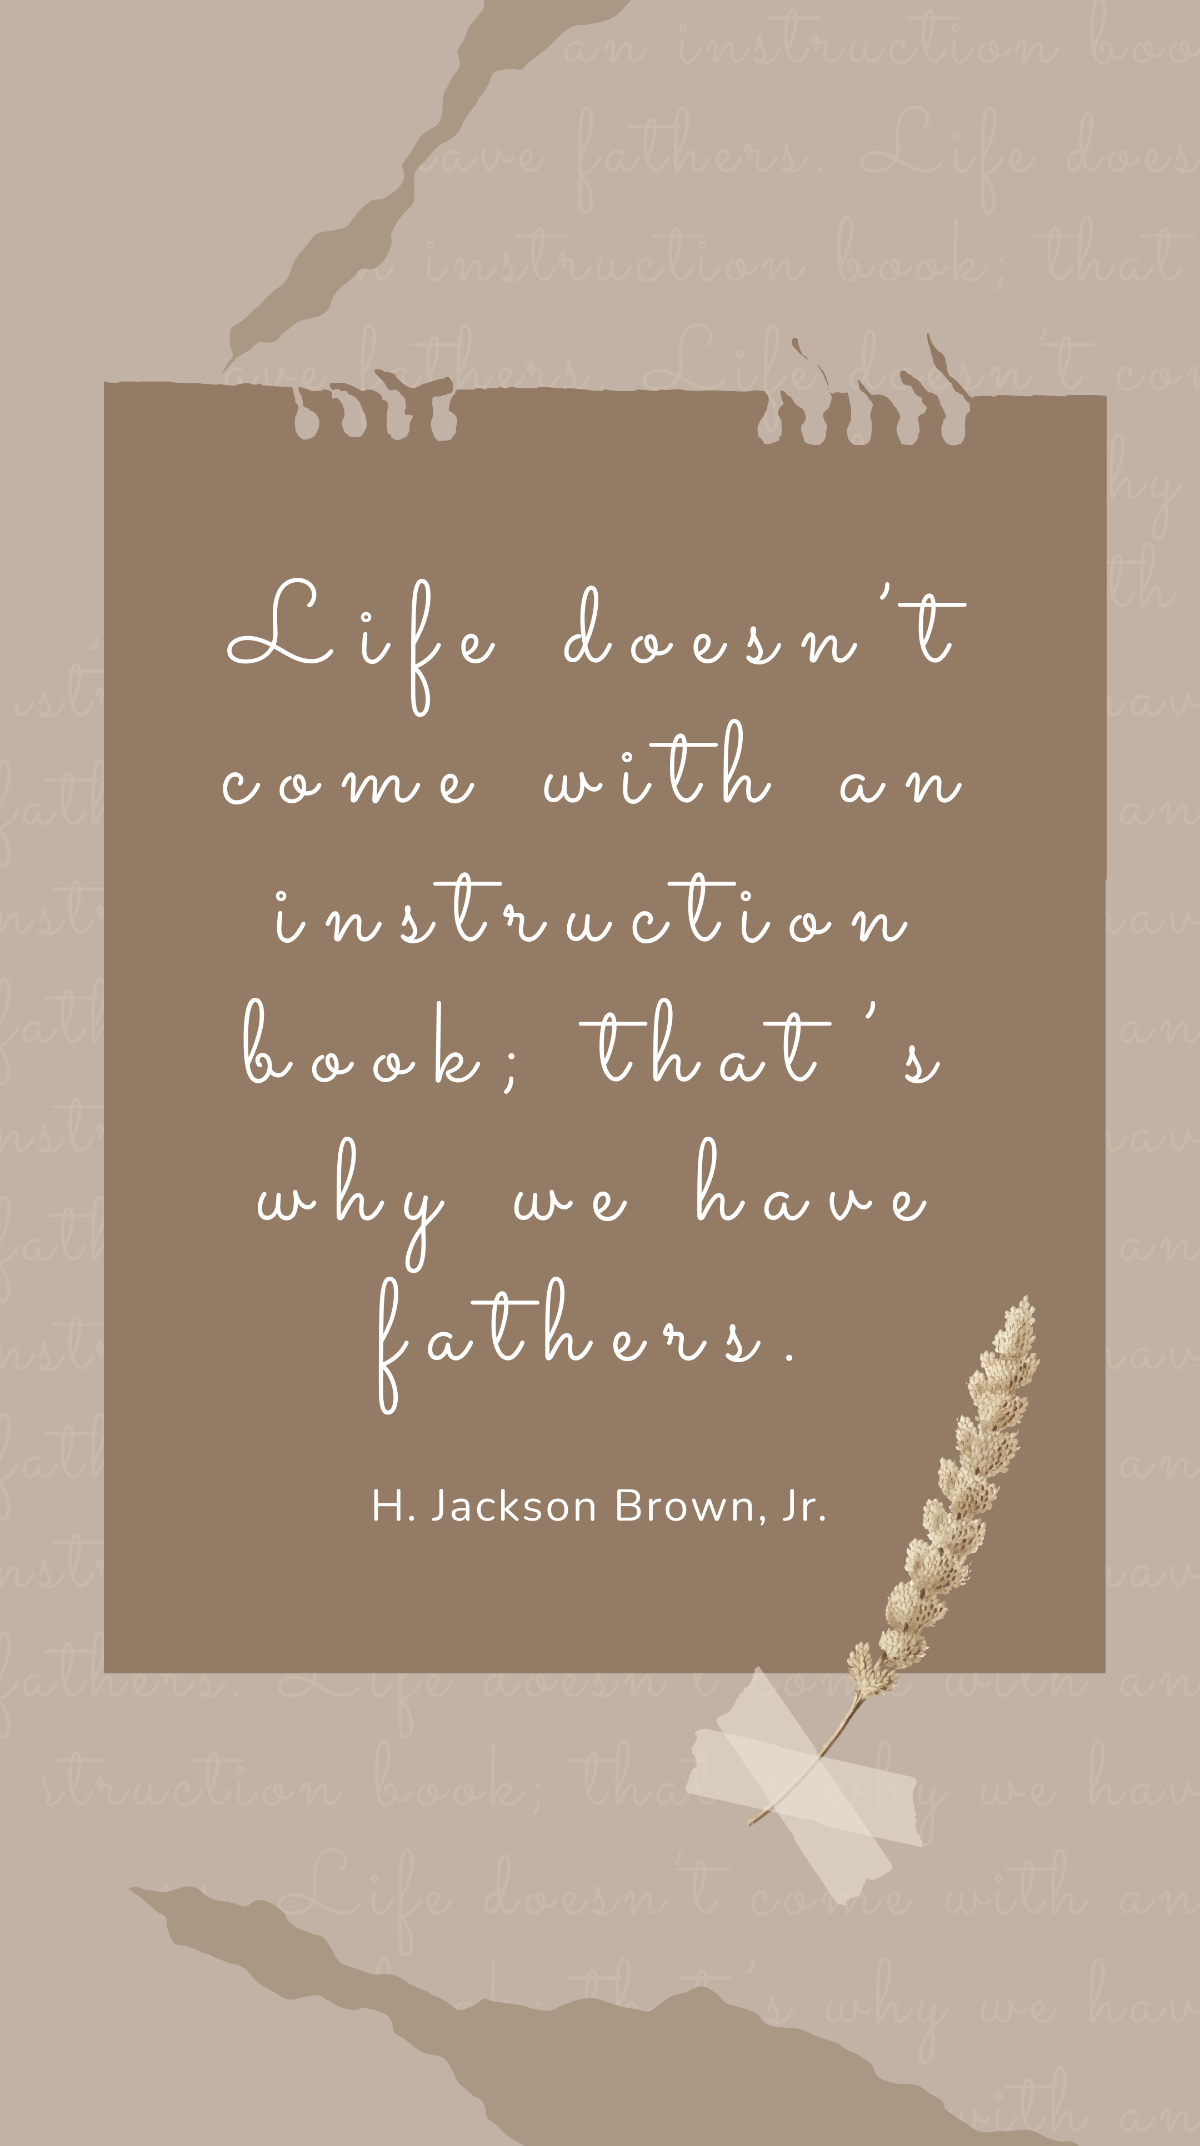 H. Jackson Brown, Jr. - Life doesn’t come with an instruction book; that’s why we have fathers. Template